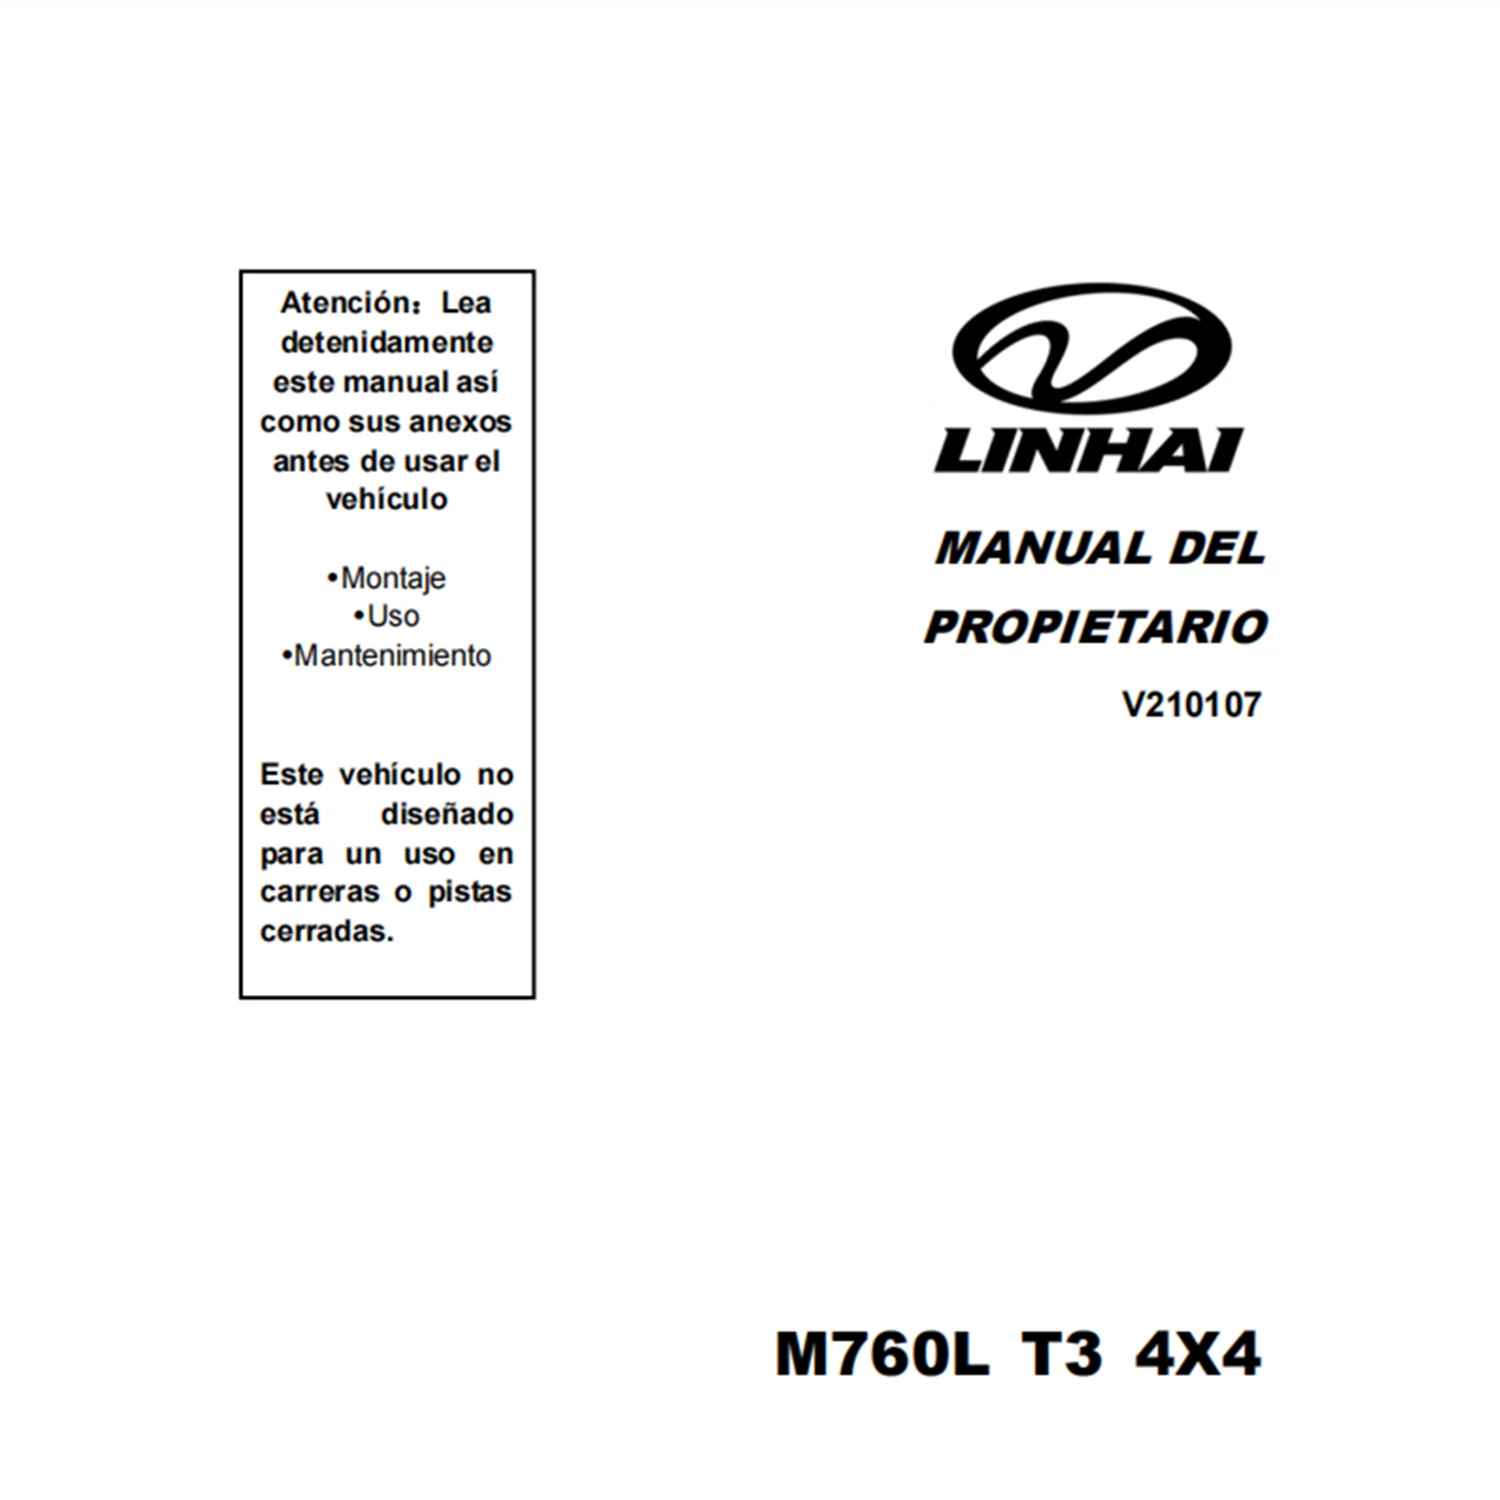 

LINHAI M760L T3 4X4 MANUAL DEL PROPIETARIO V210107 LINHAI Electric OWNER MANUAL IN SPANISH ONLY SEND BY EMAIL NOT VEHICLE